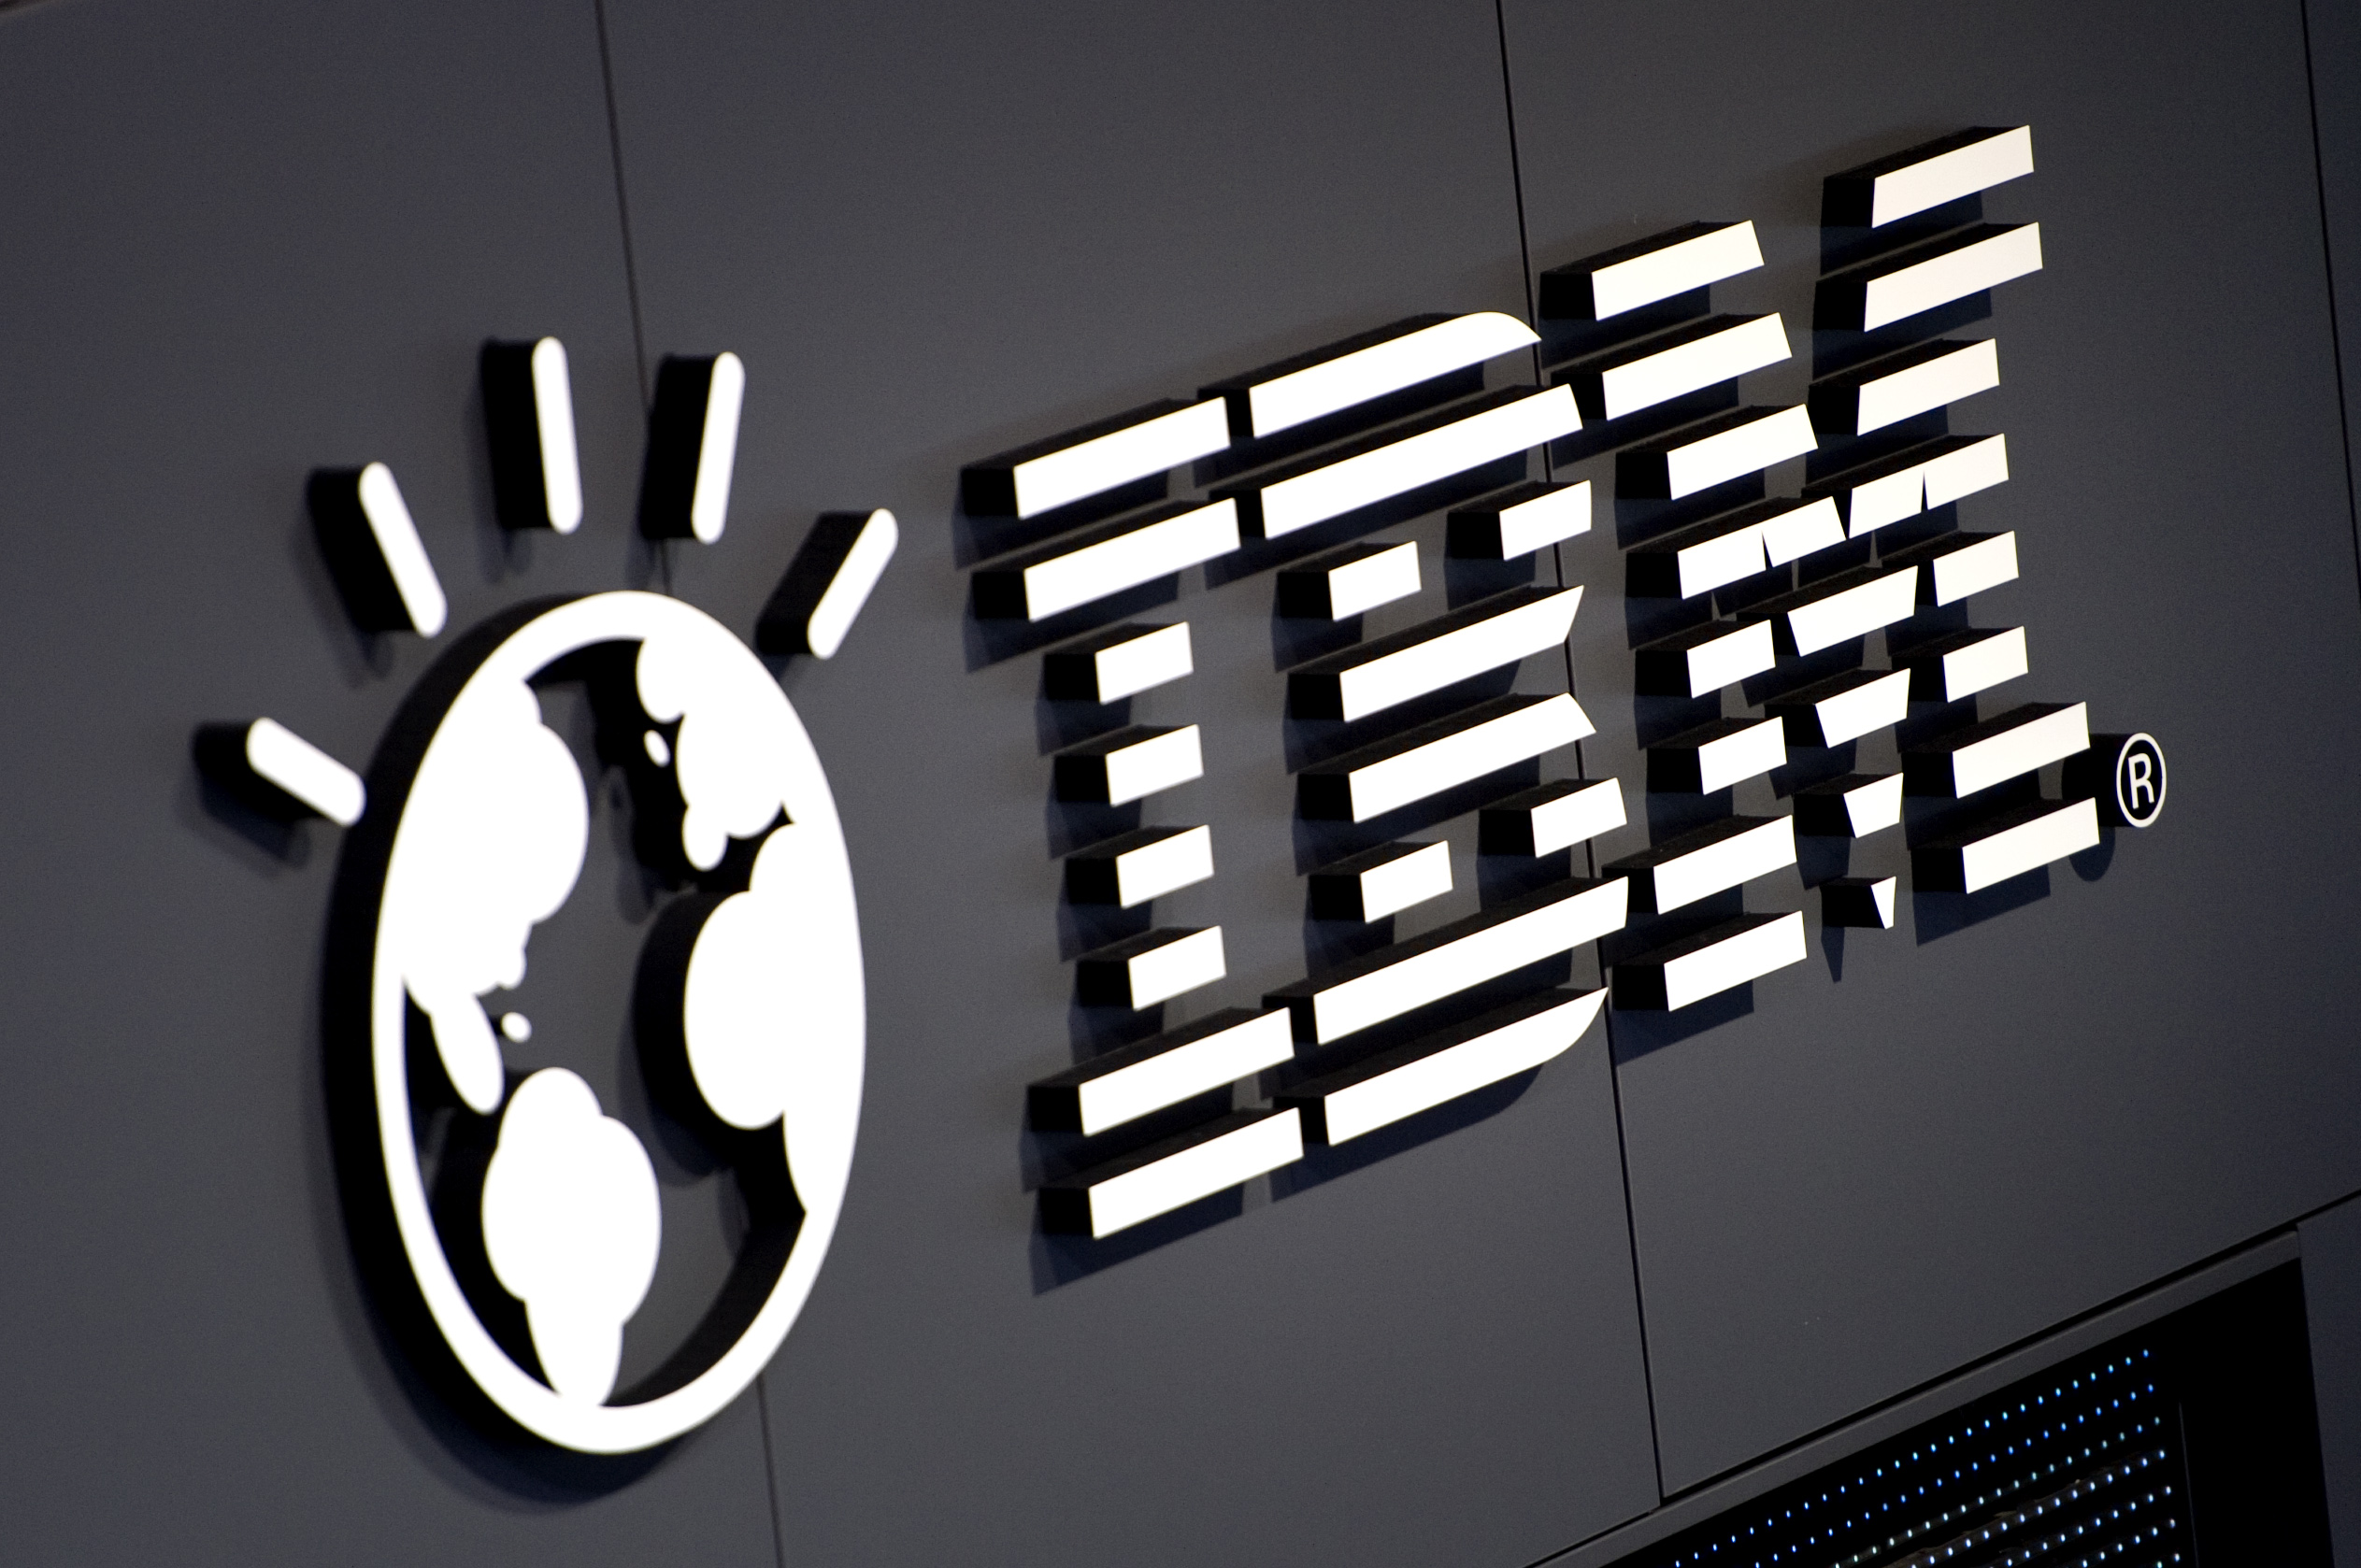 The logo of IBM is seen at their booth p